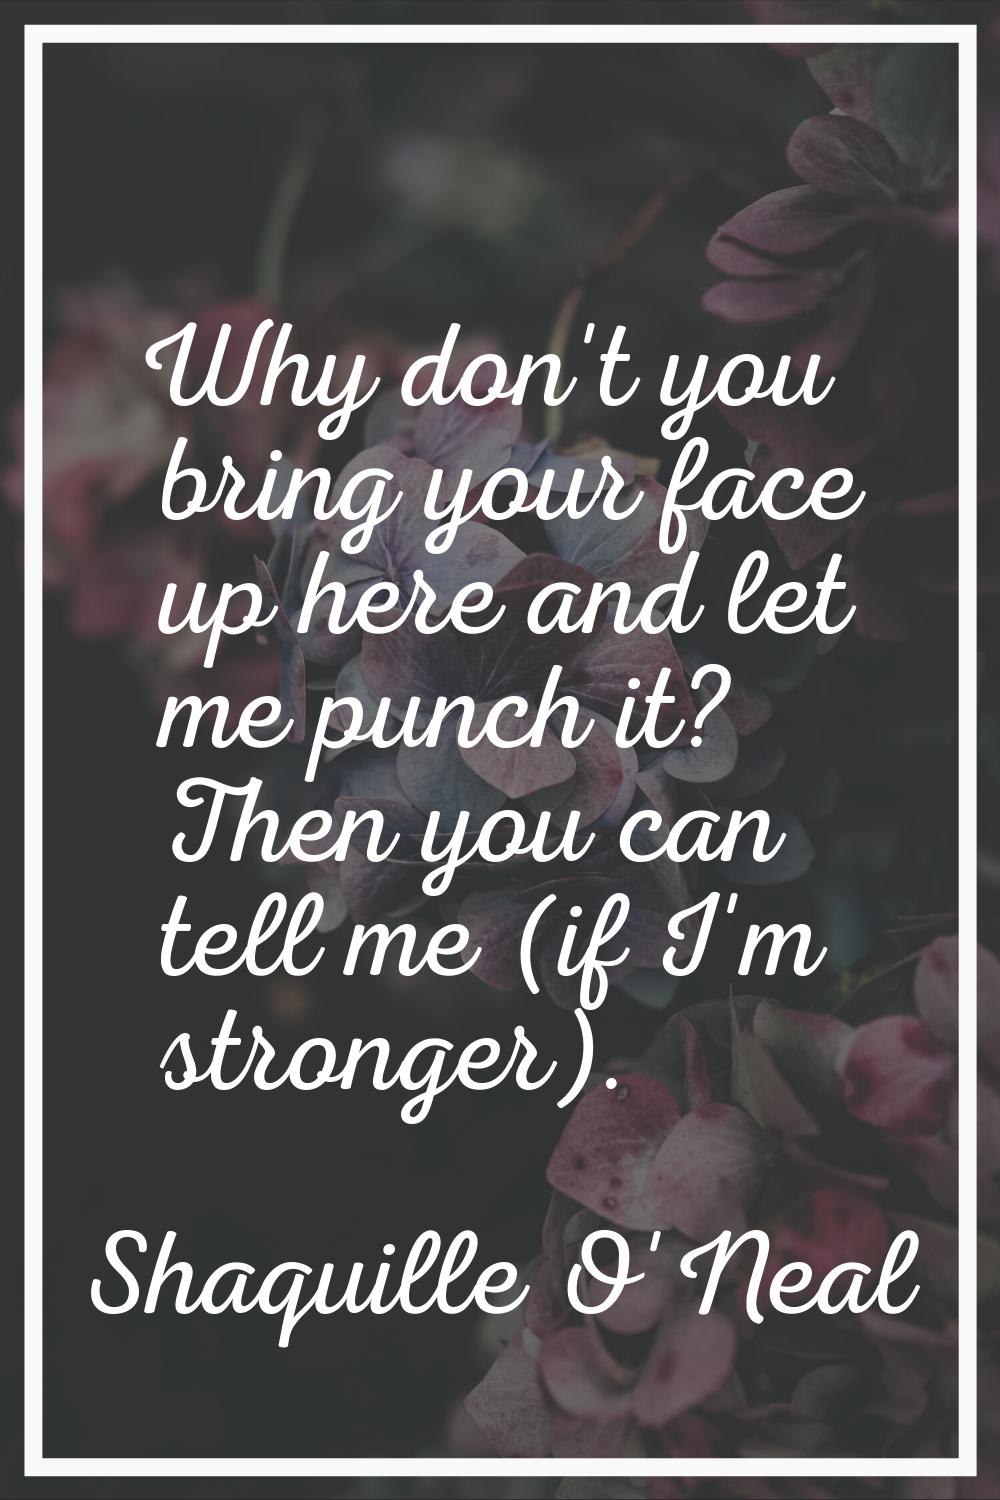 Why don't you bring your face up here and let me punch it? Then you can tell me (if I'm stronger).